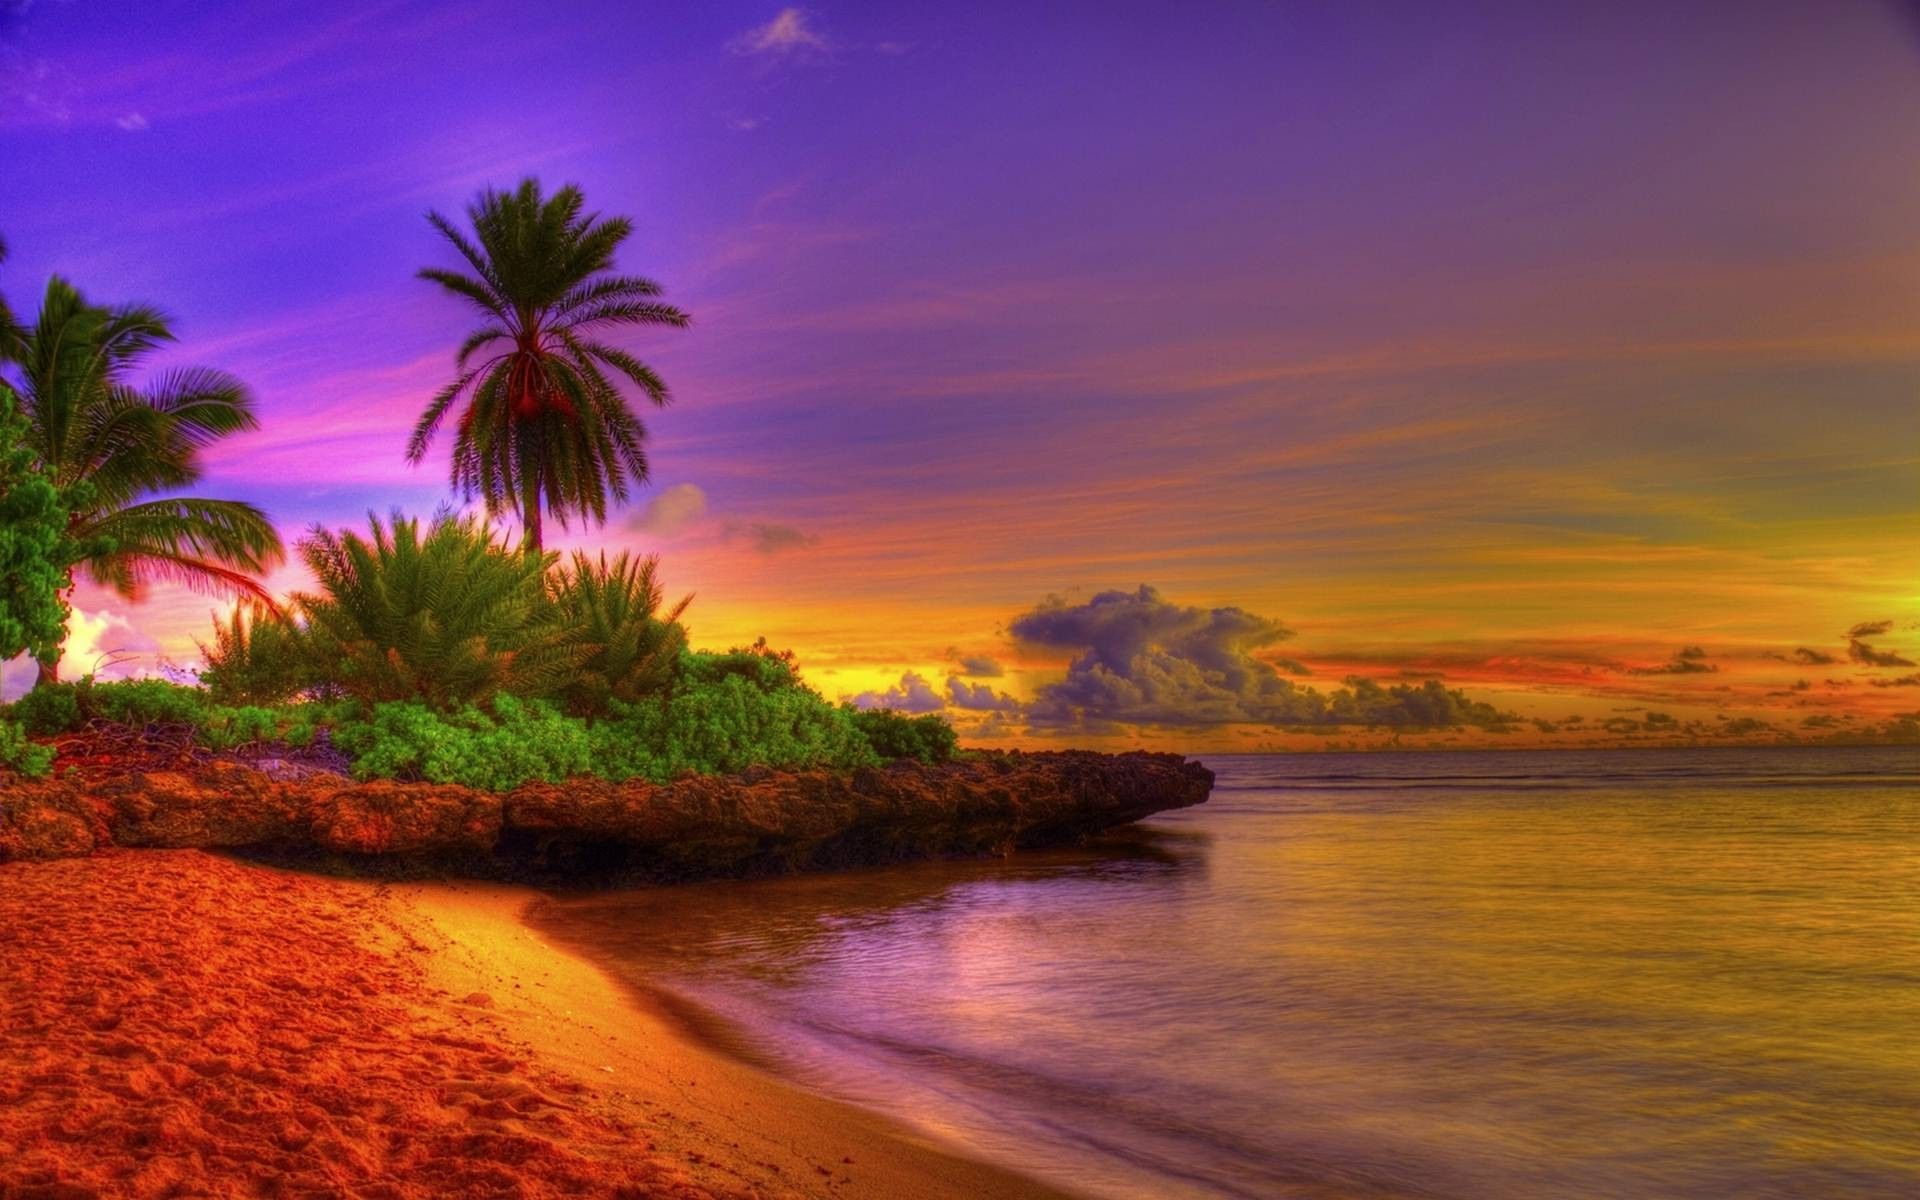 Colorful Tropical Beaches Desktop Wallpapers on